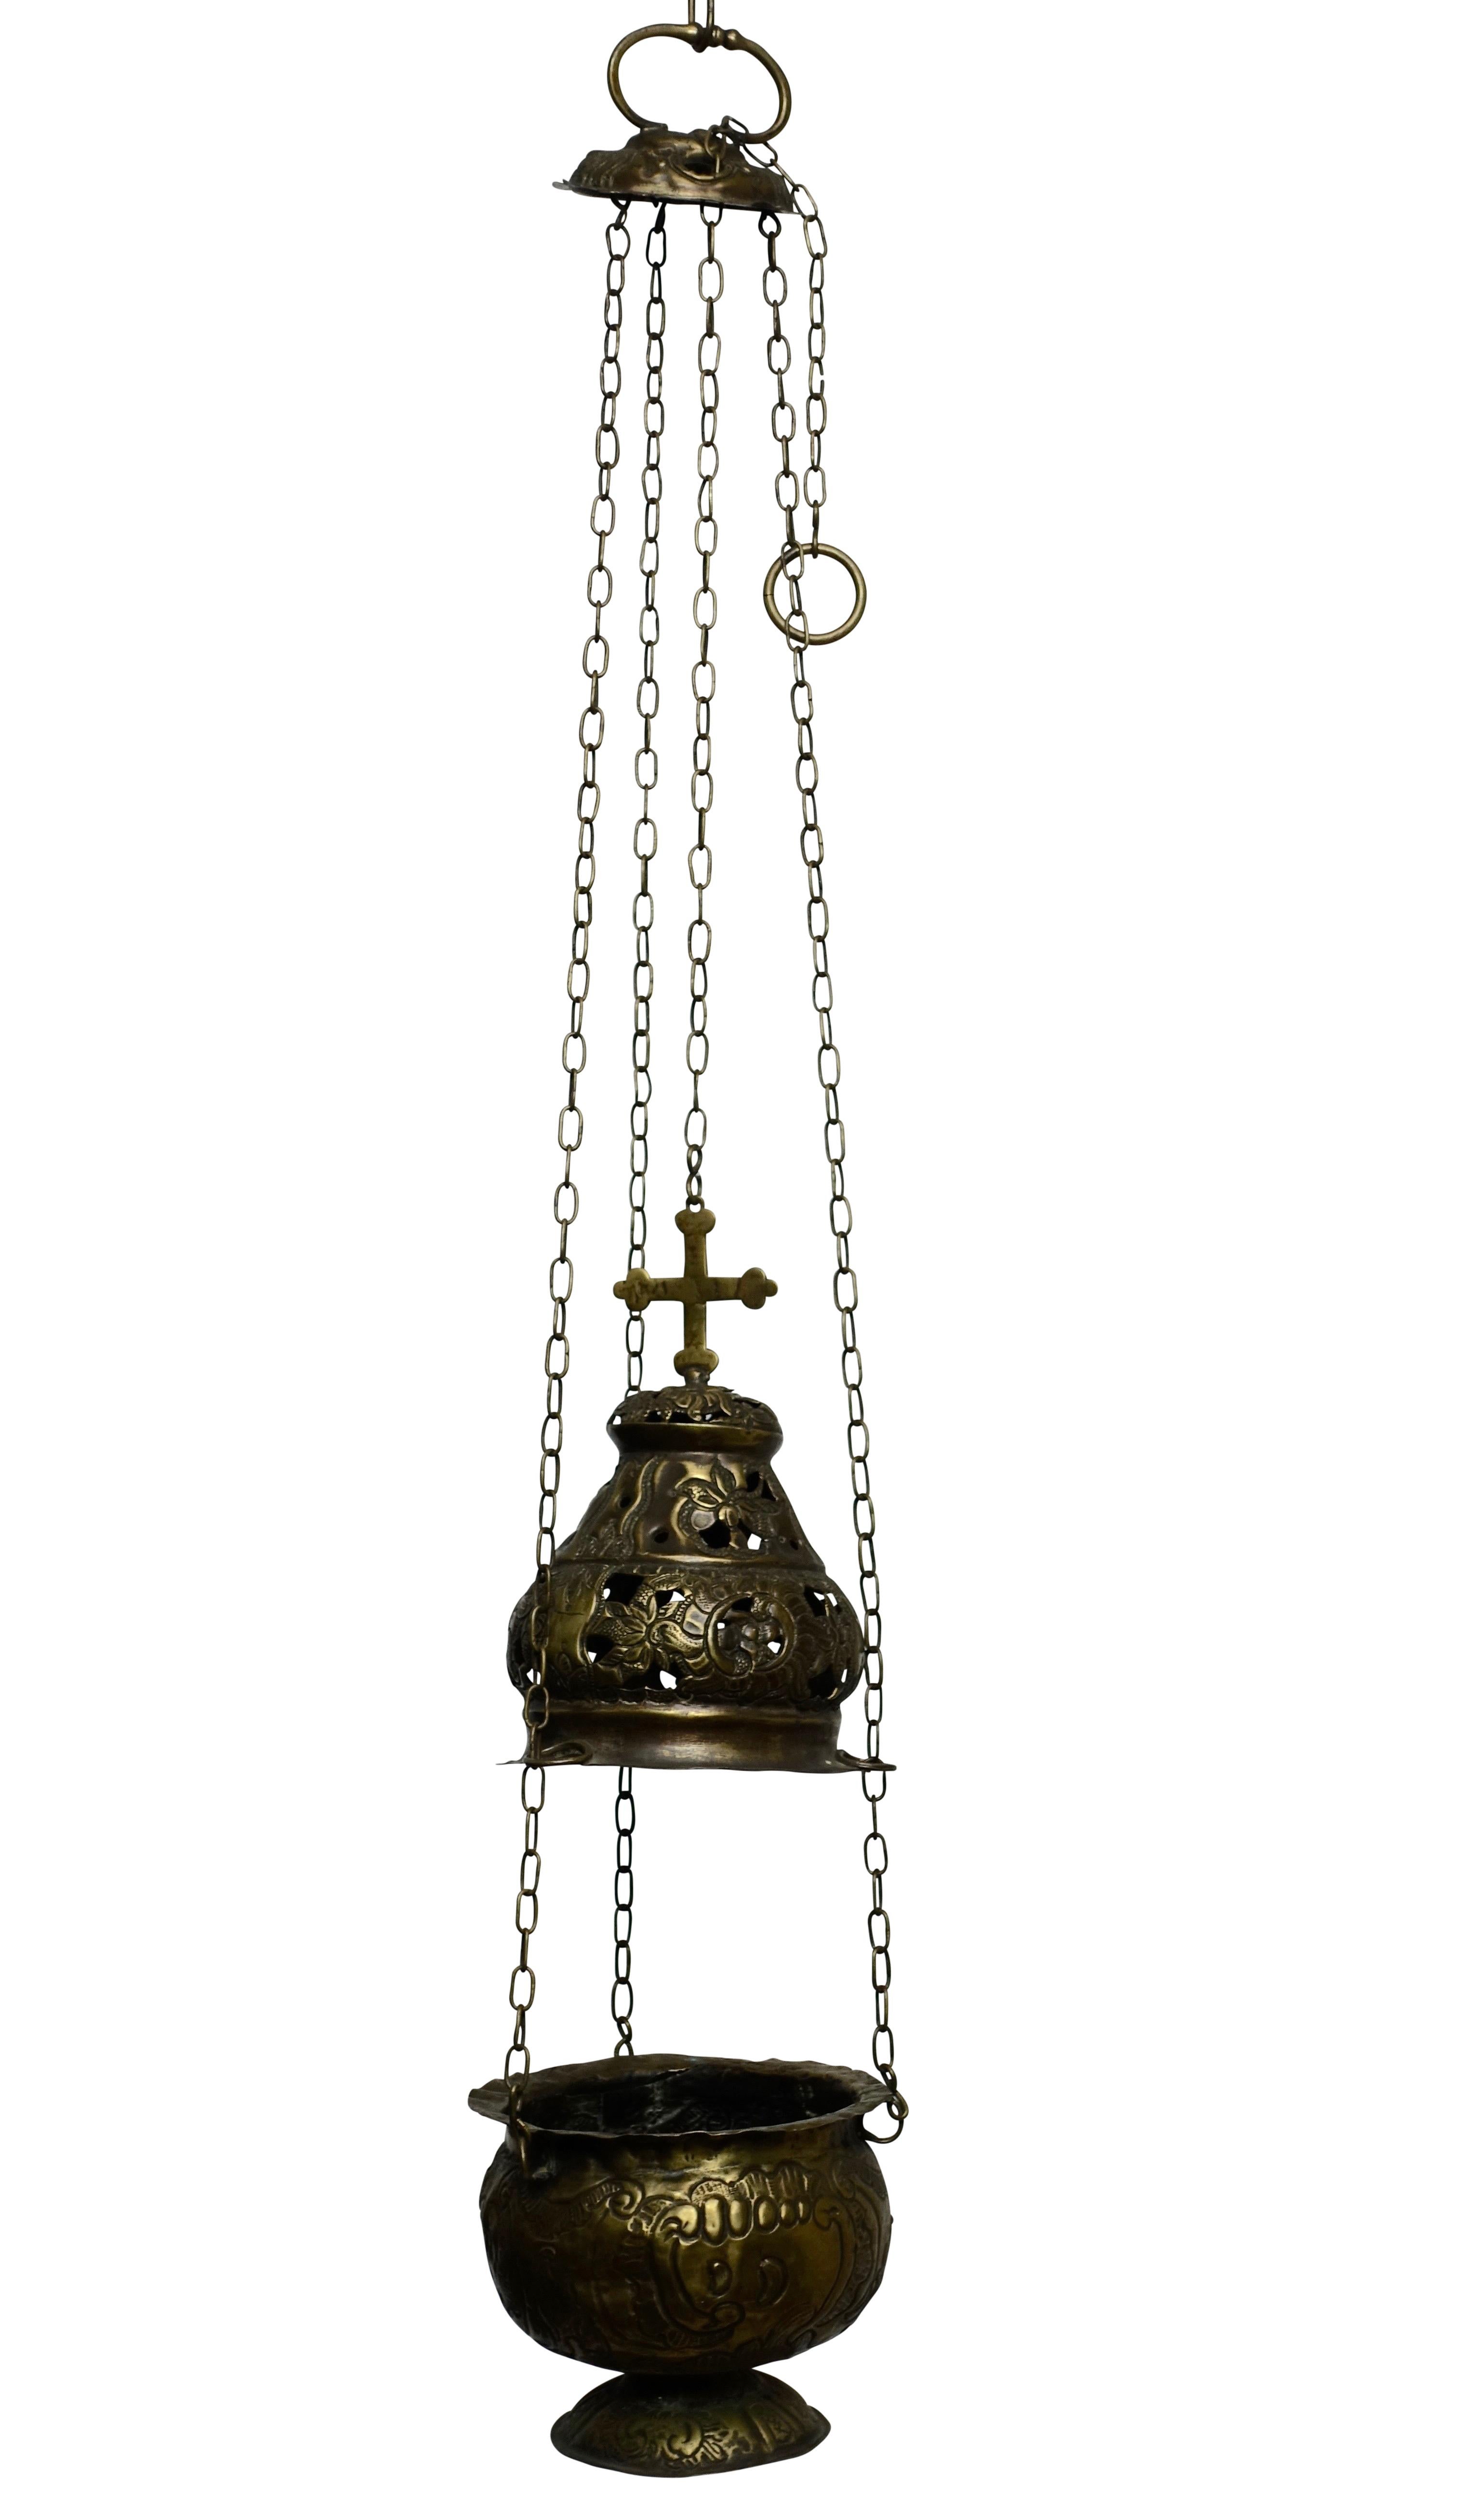 An early 19th century Spanish colonial repousse brass hanging incense burner or incensor, of very Fine craftsmanship in the Rococo manner. Overall length with chain is 30 inches.
 